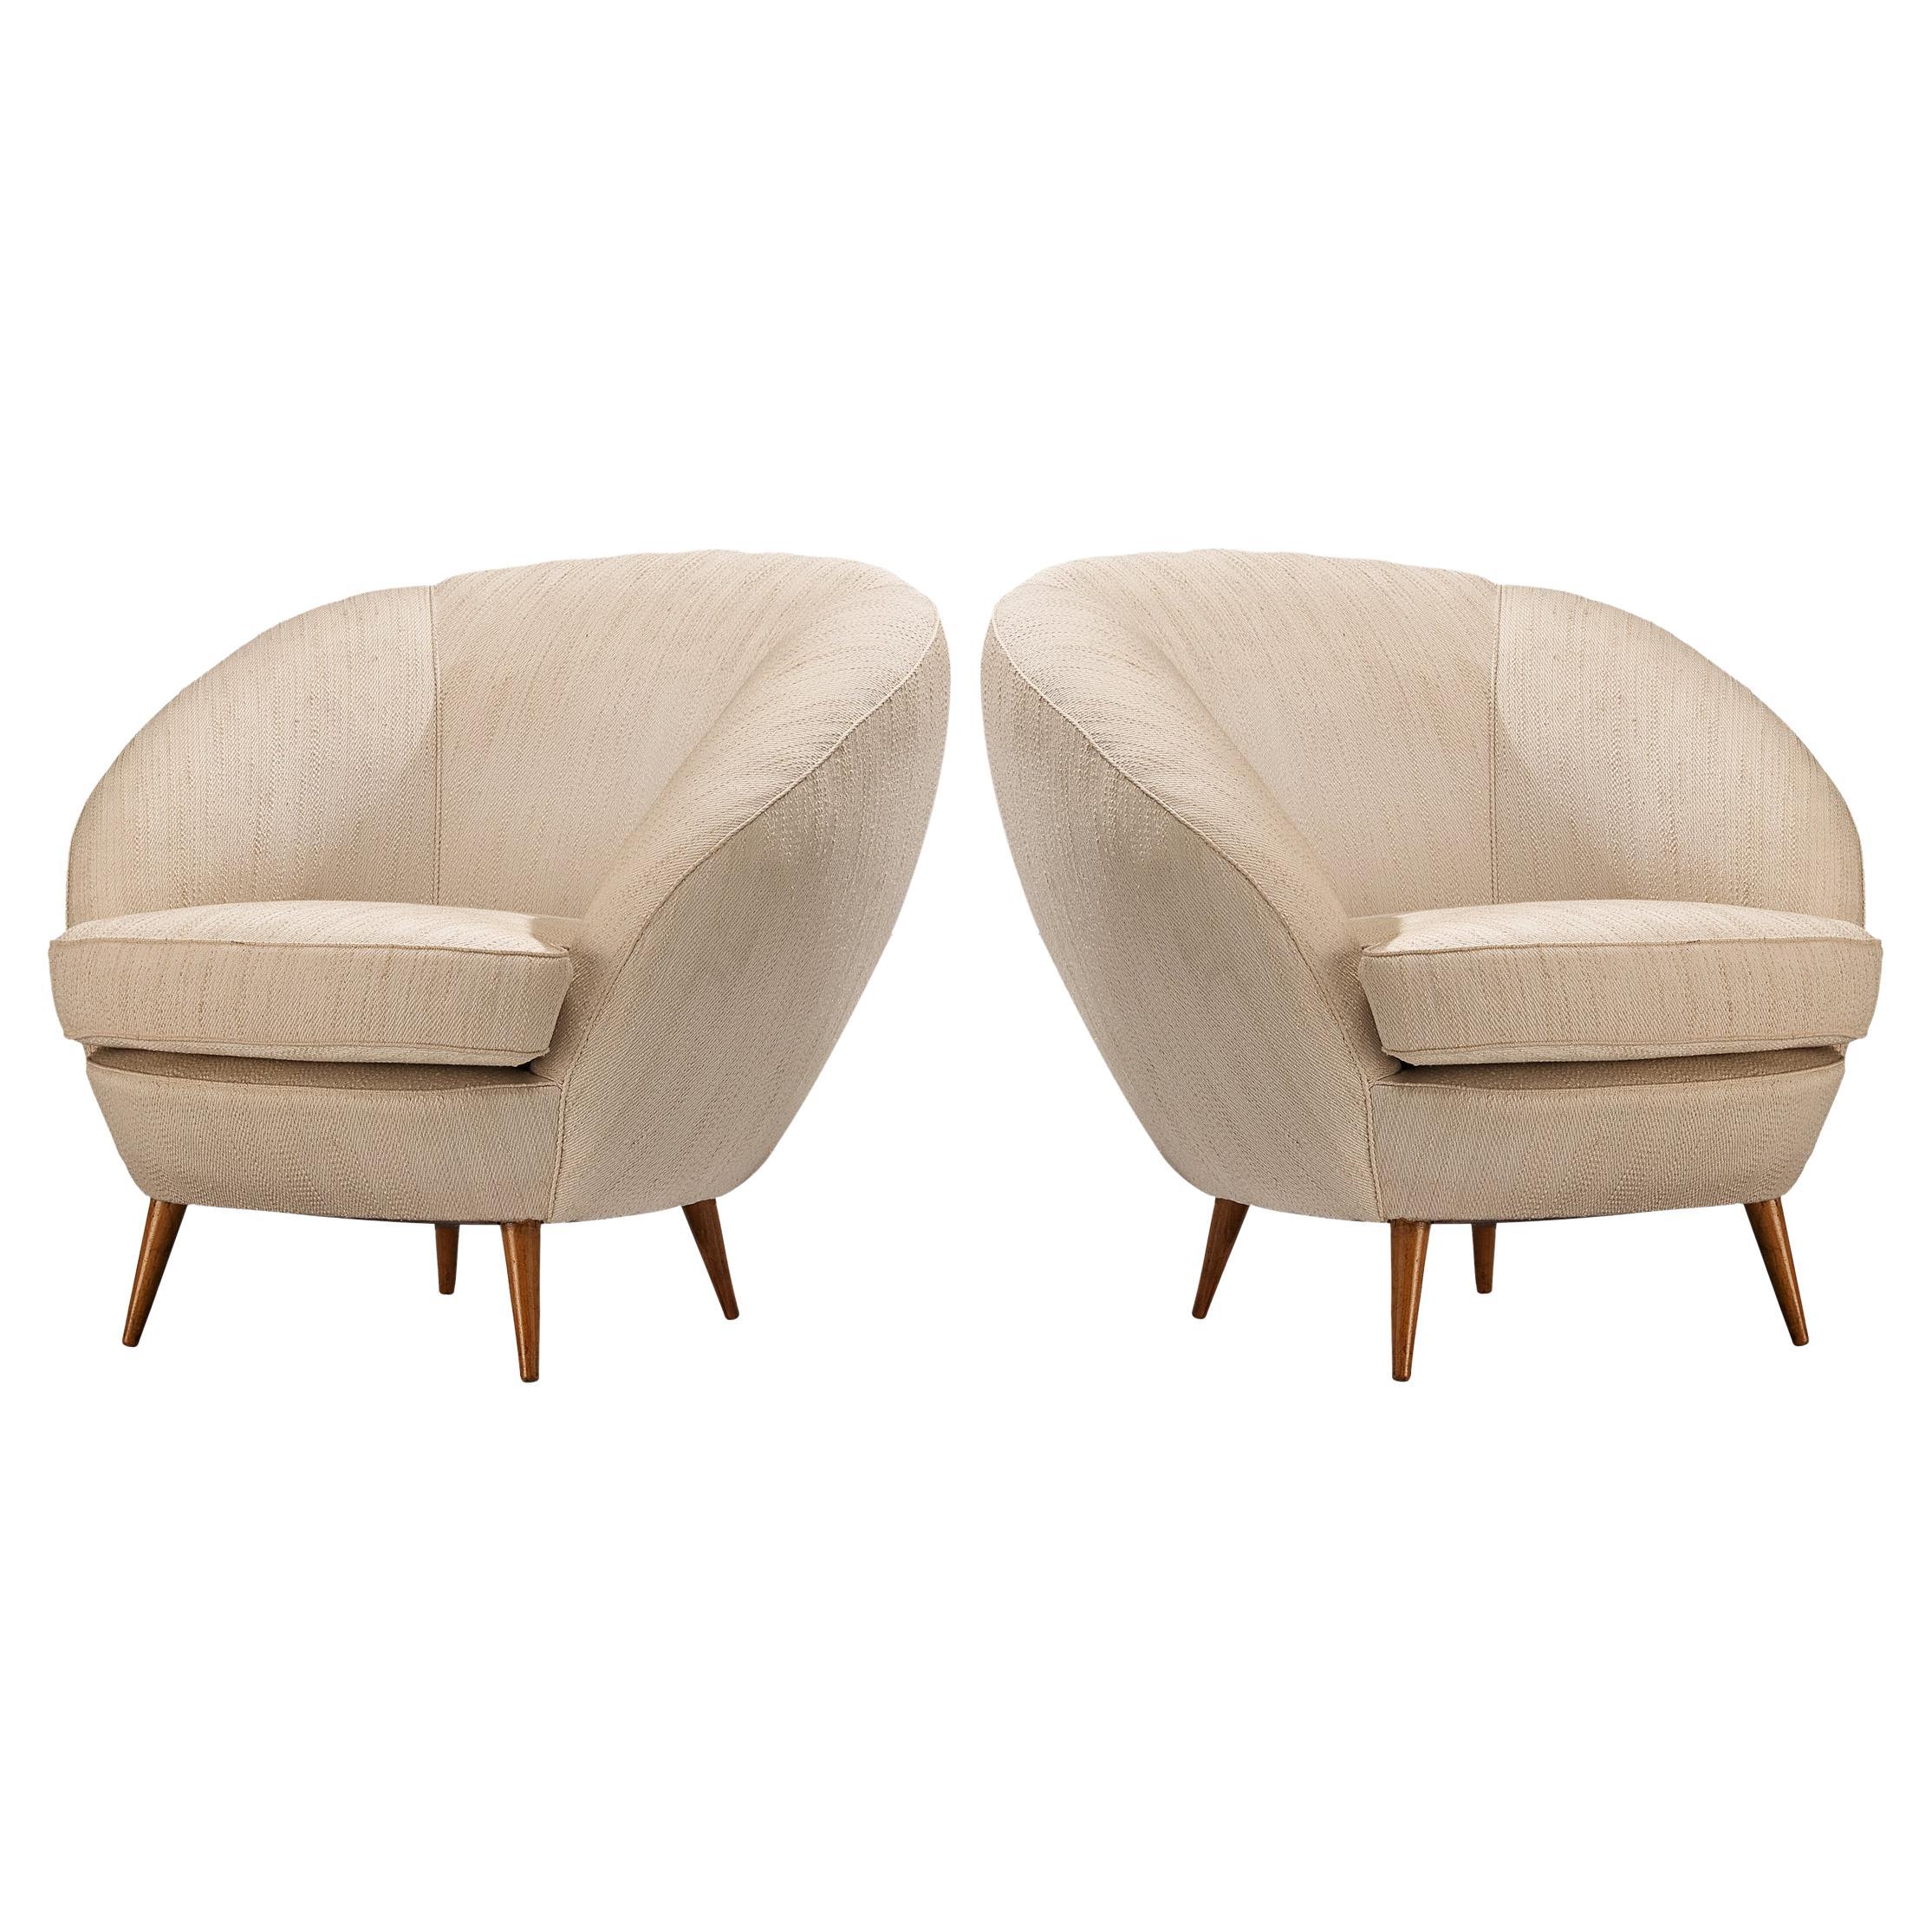 Grand Italian Pair Lounge Chairs in Off-White Upholstery 